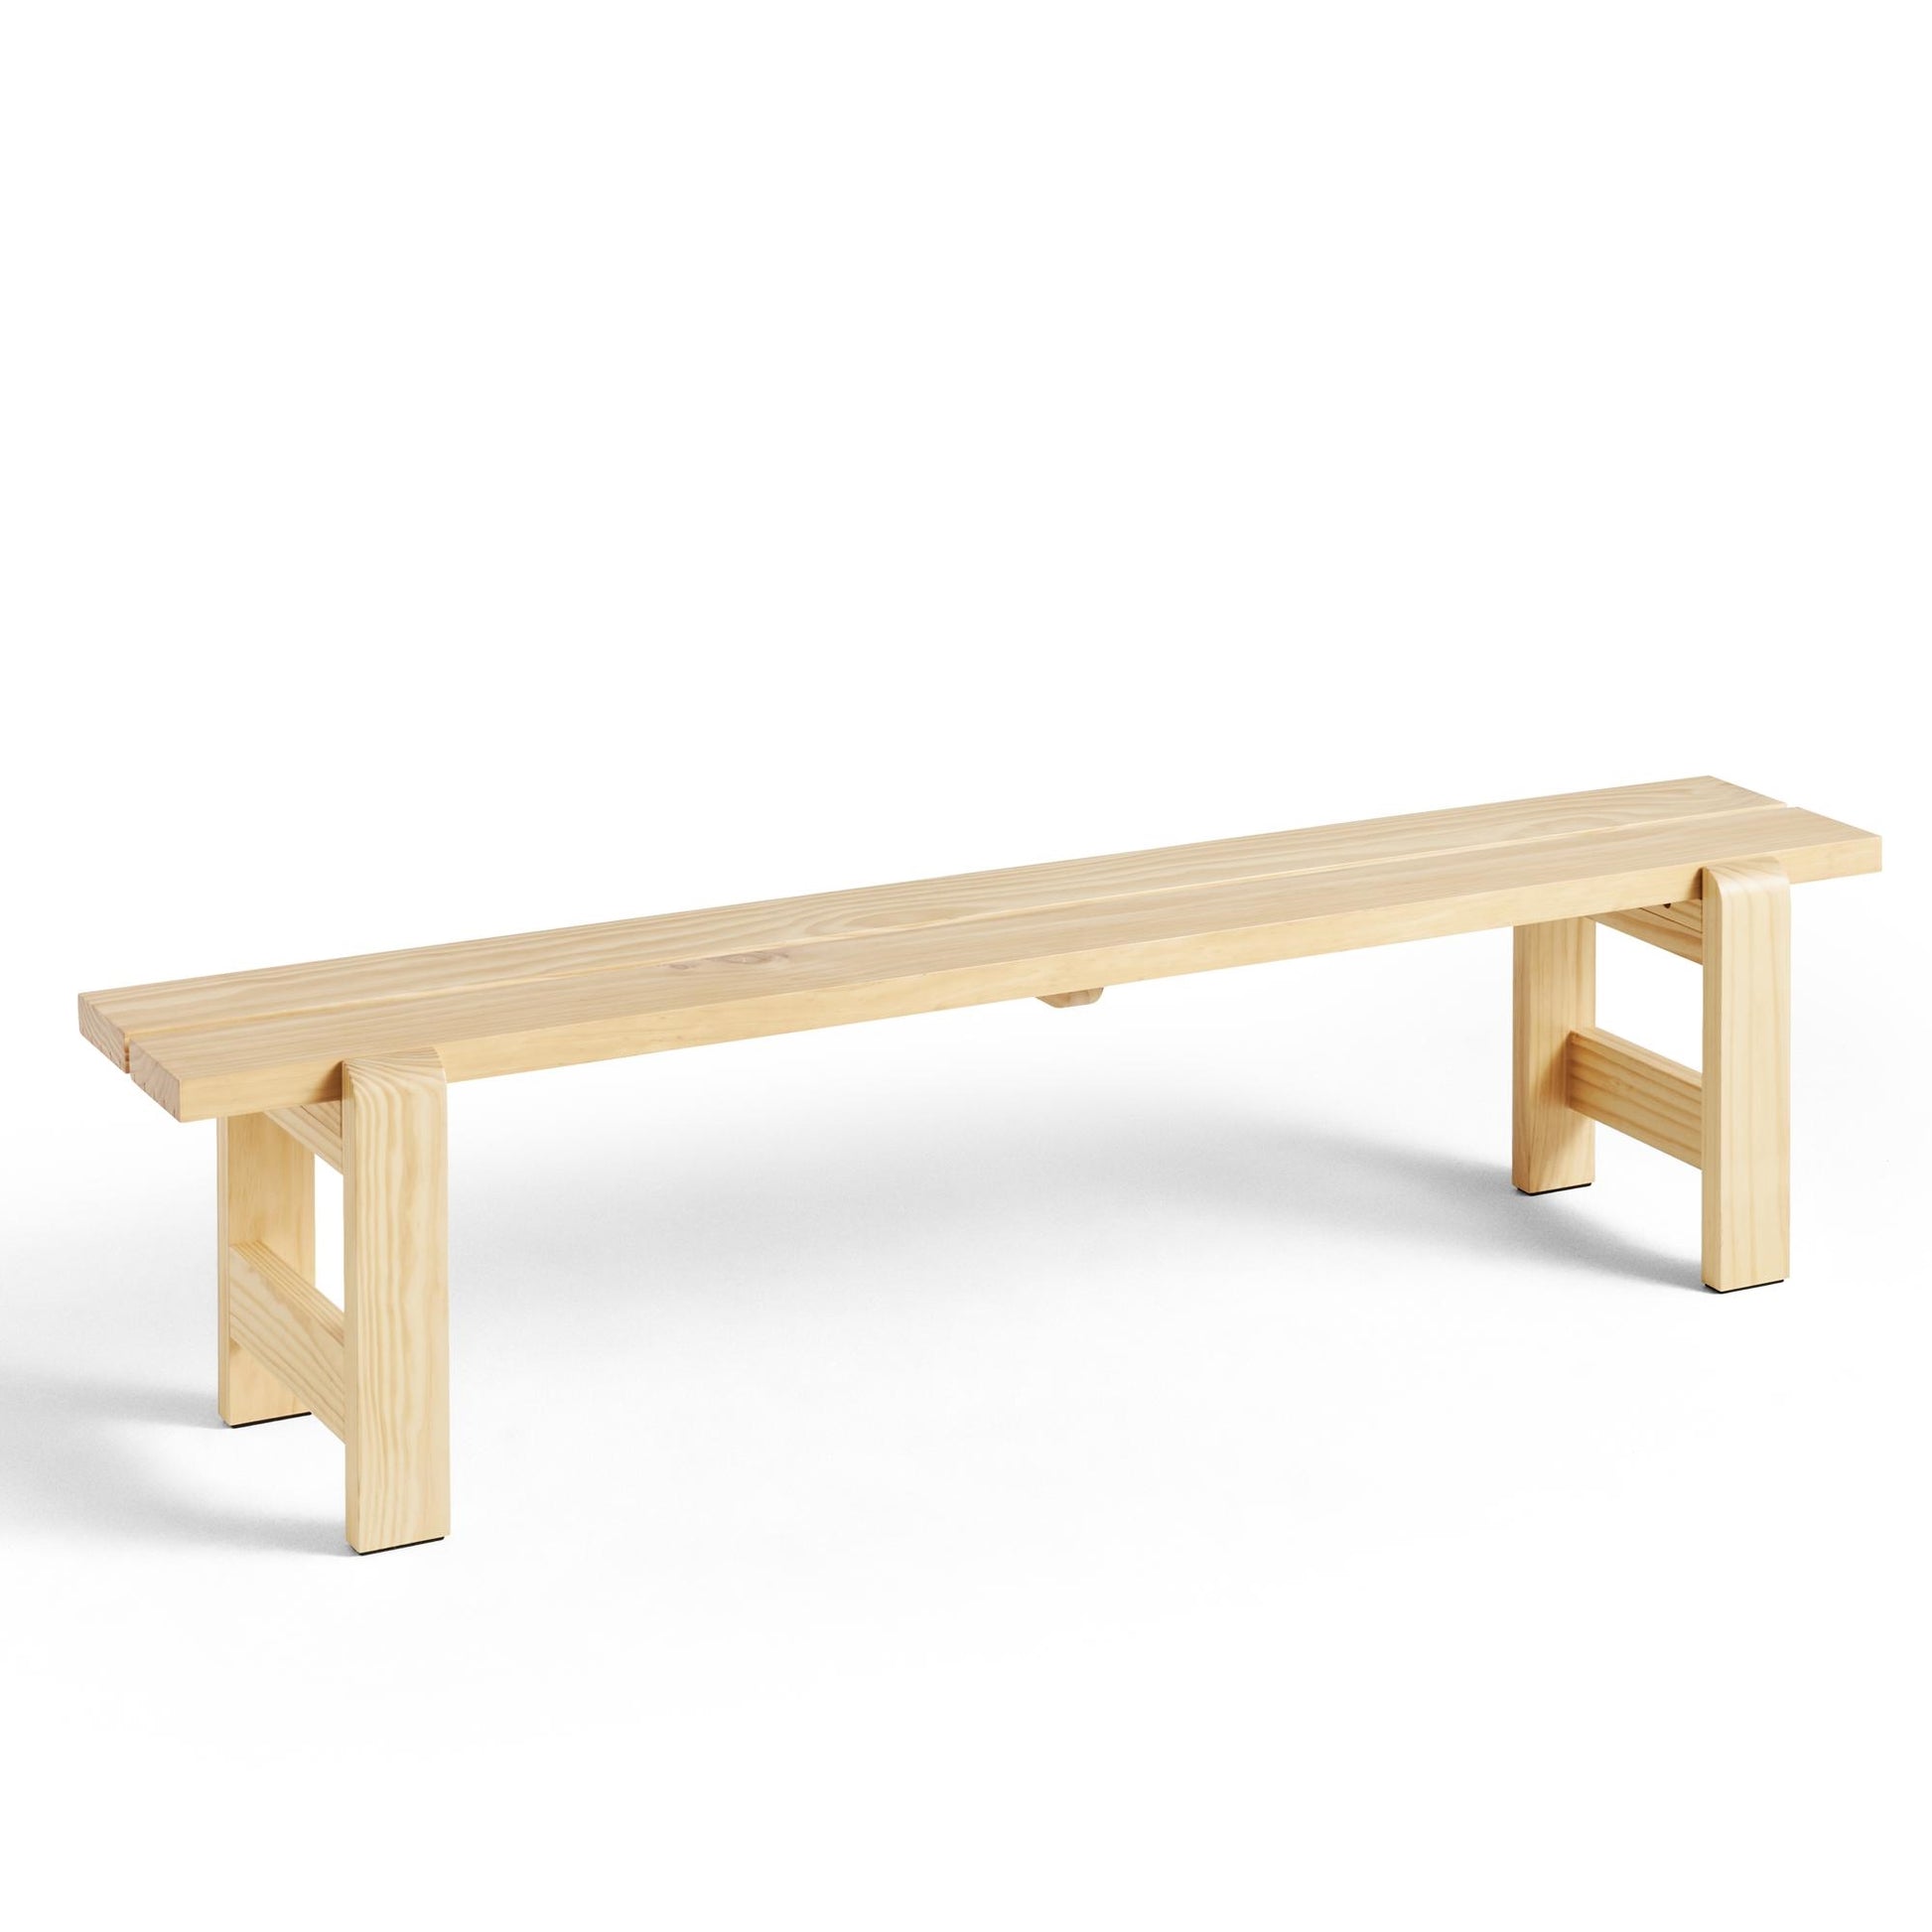 Weekday Bench L190 x W32 x H45 by HAY #Lacquered Pine